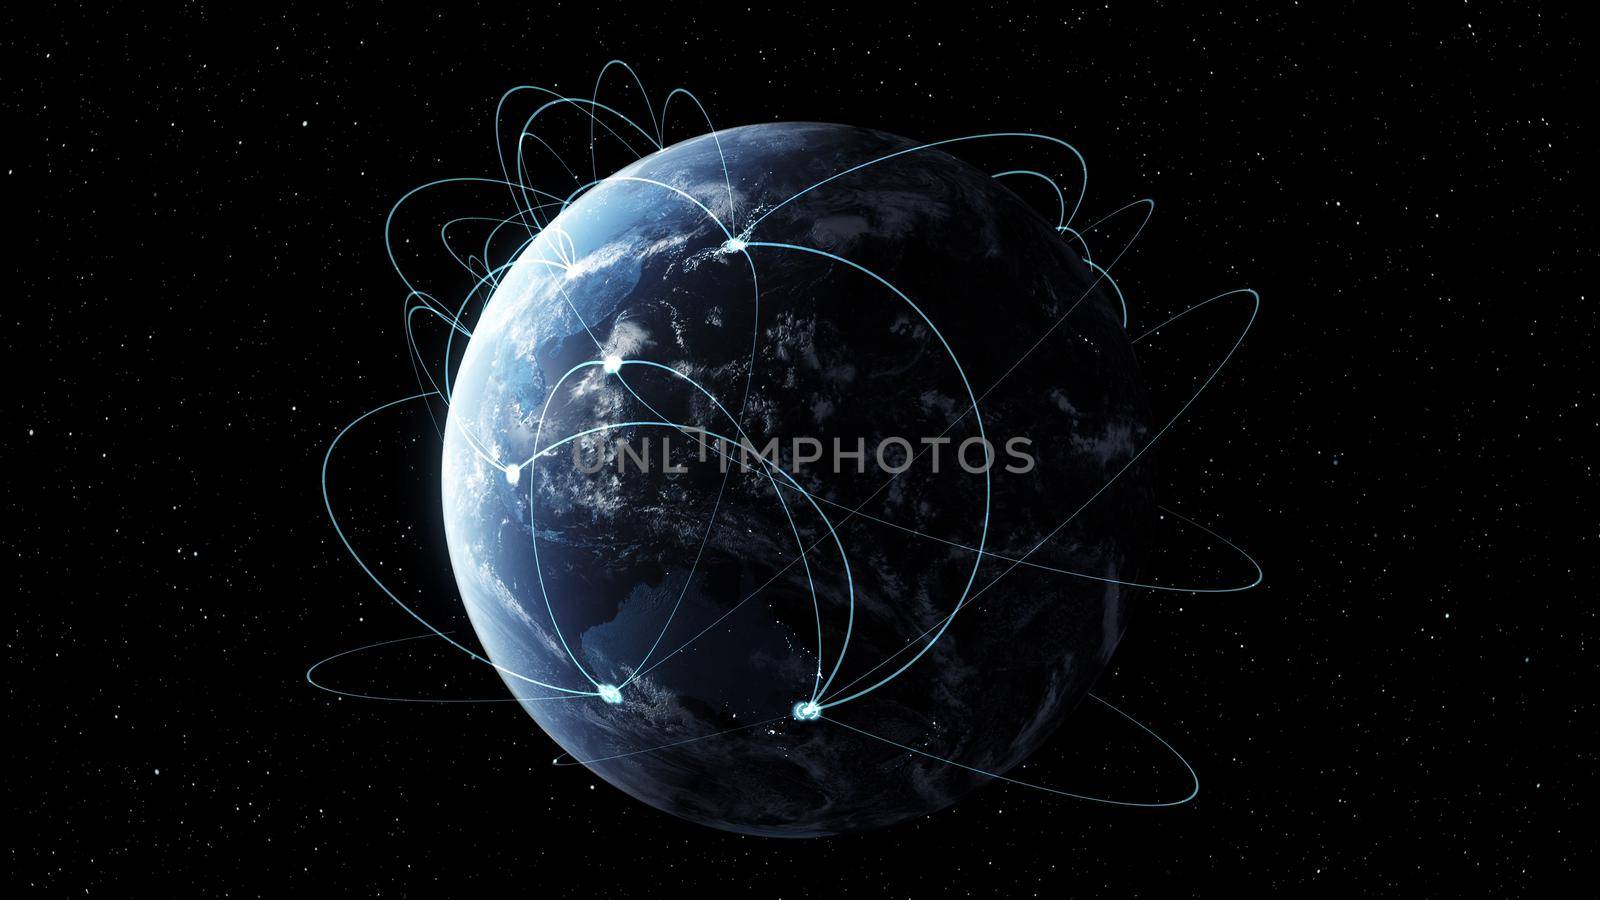 Global network and internet connection in orbital earth globe by biancoblue